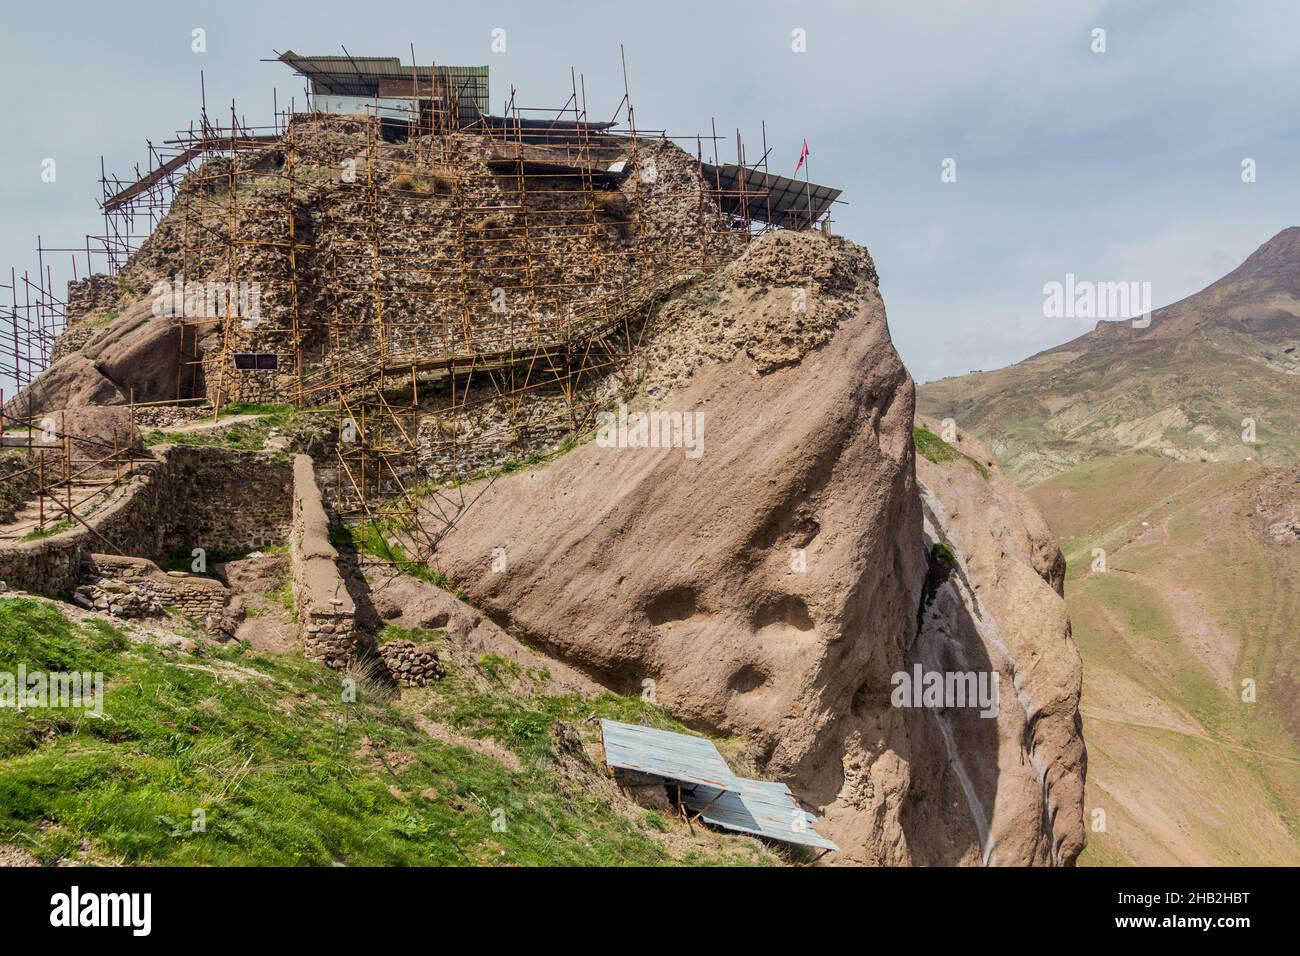 Alamut (Persian: الموت) meaning eagle's nest is a ruined